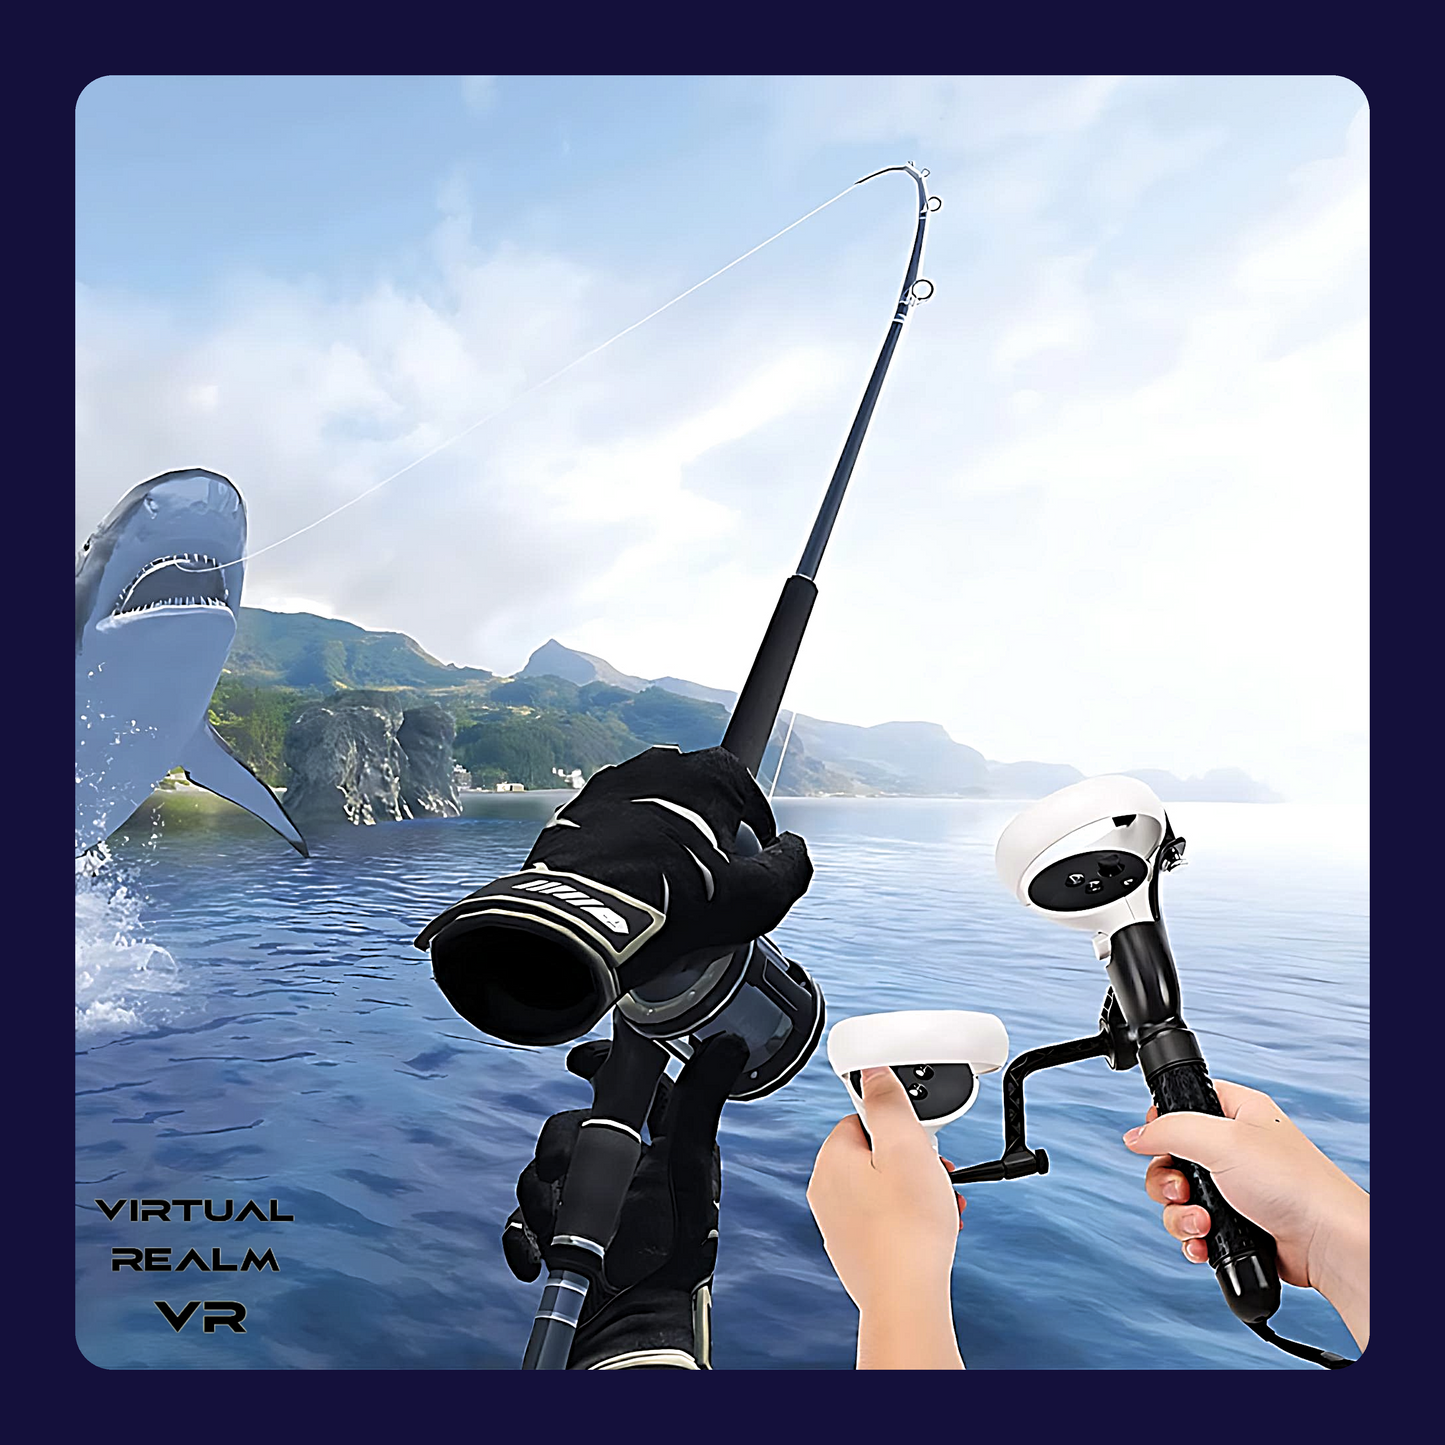 Real VR Fishing - Spinning vs. Casting Rod upgrade path? : r/OculusQuest